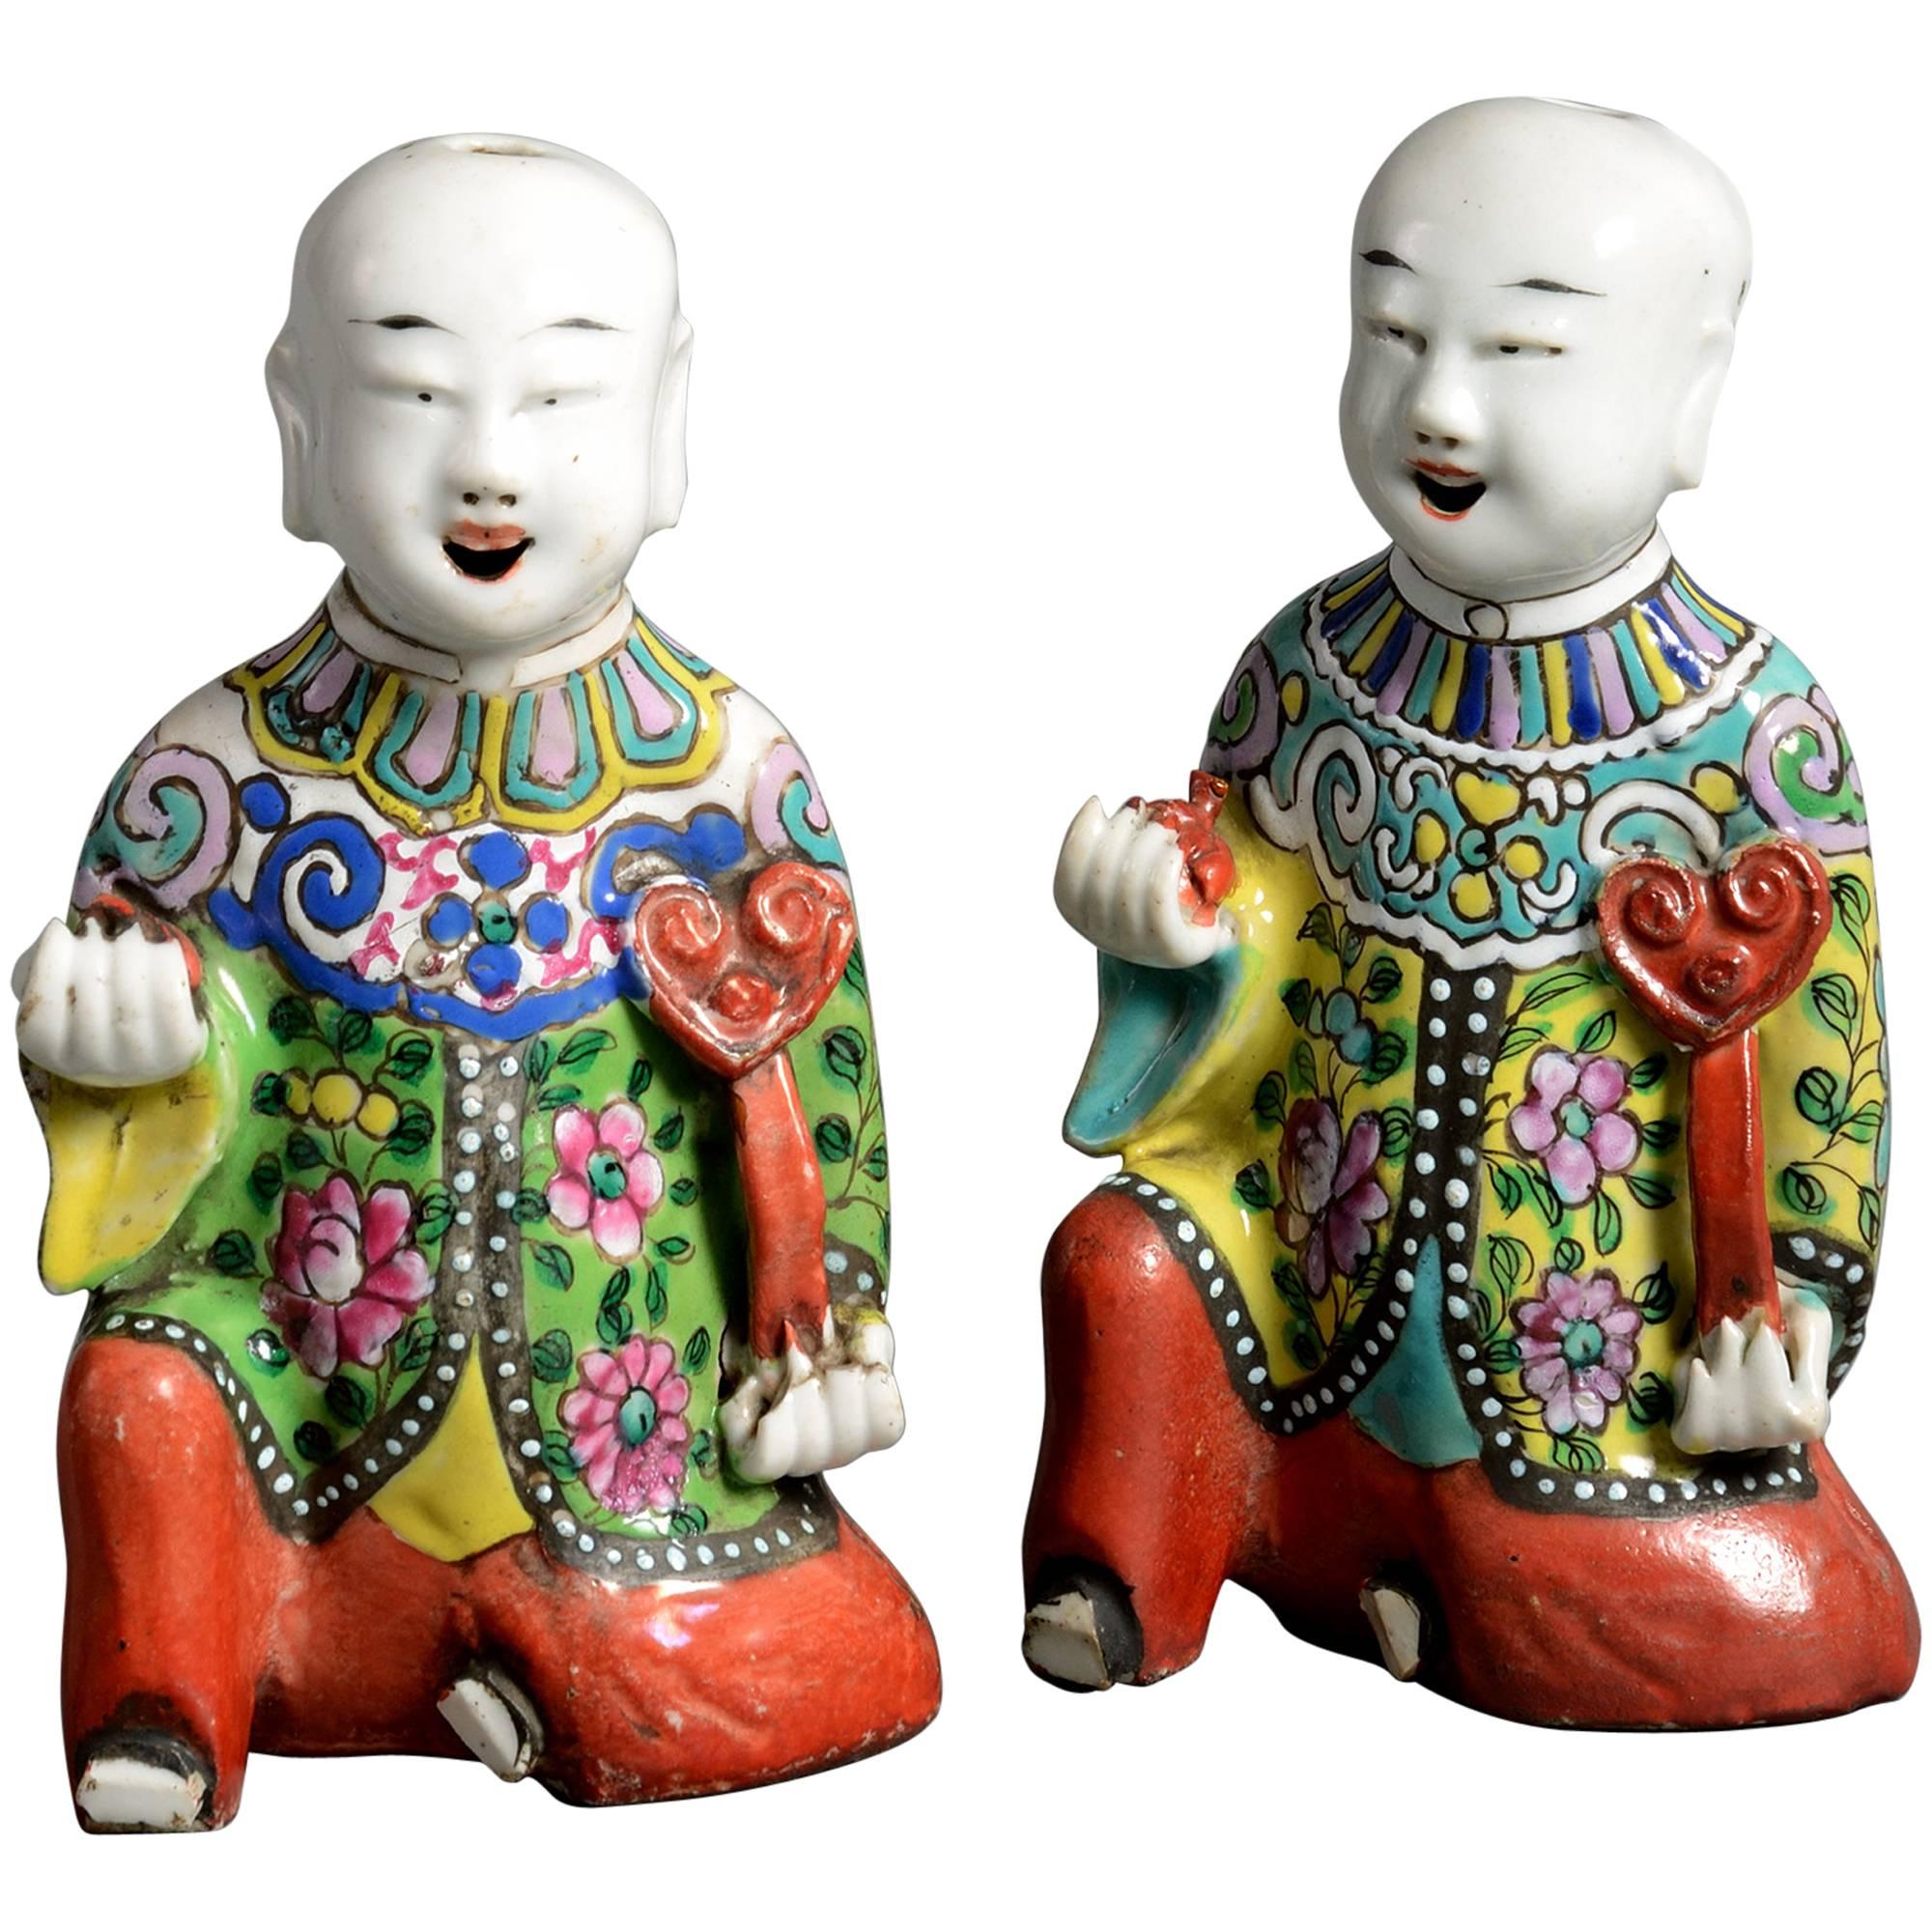 Pair of Early 19th Century Porcelain Chinese Laughing Boys